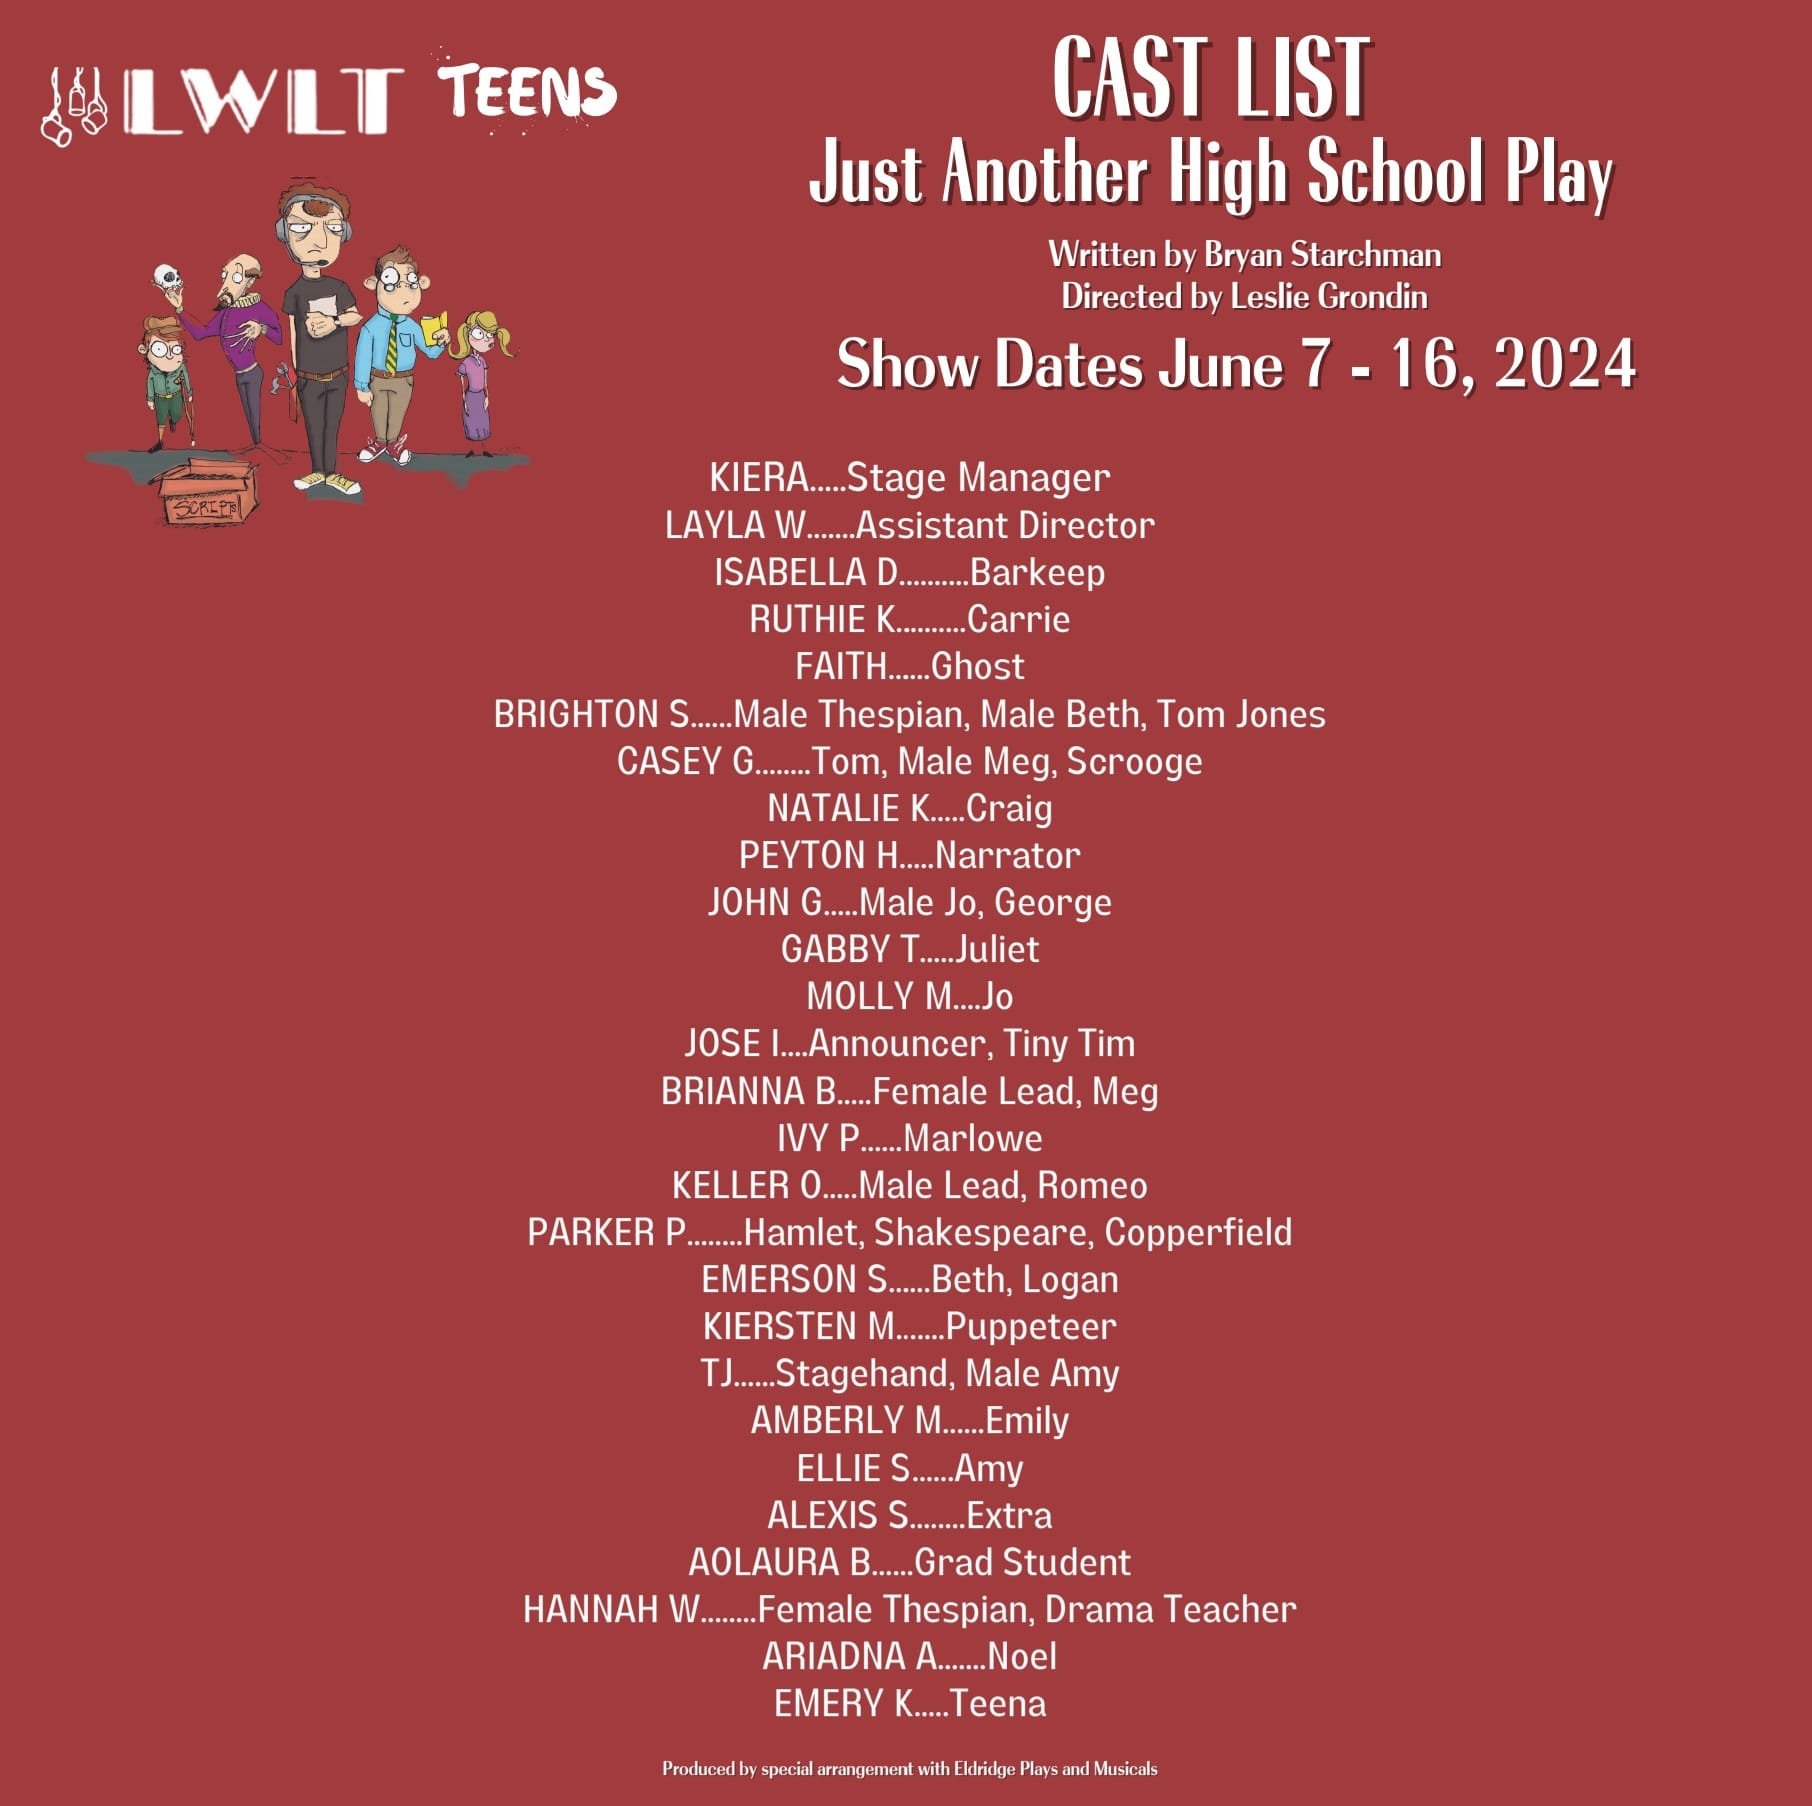 Congrats to all of the teens that came out for auditions. 

Read through Friday, May 3rd at 6:30pm. You will receive your scripts that evening.

🏫 Just Another High School Play
📅 Show dates: June 7-16
📲 Learn more: www.LWLT.org

Plot:
Here's a com